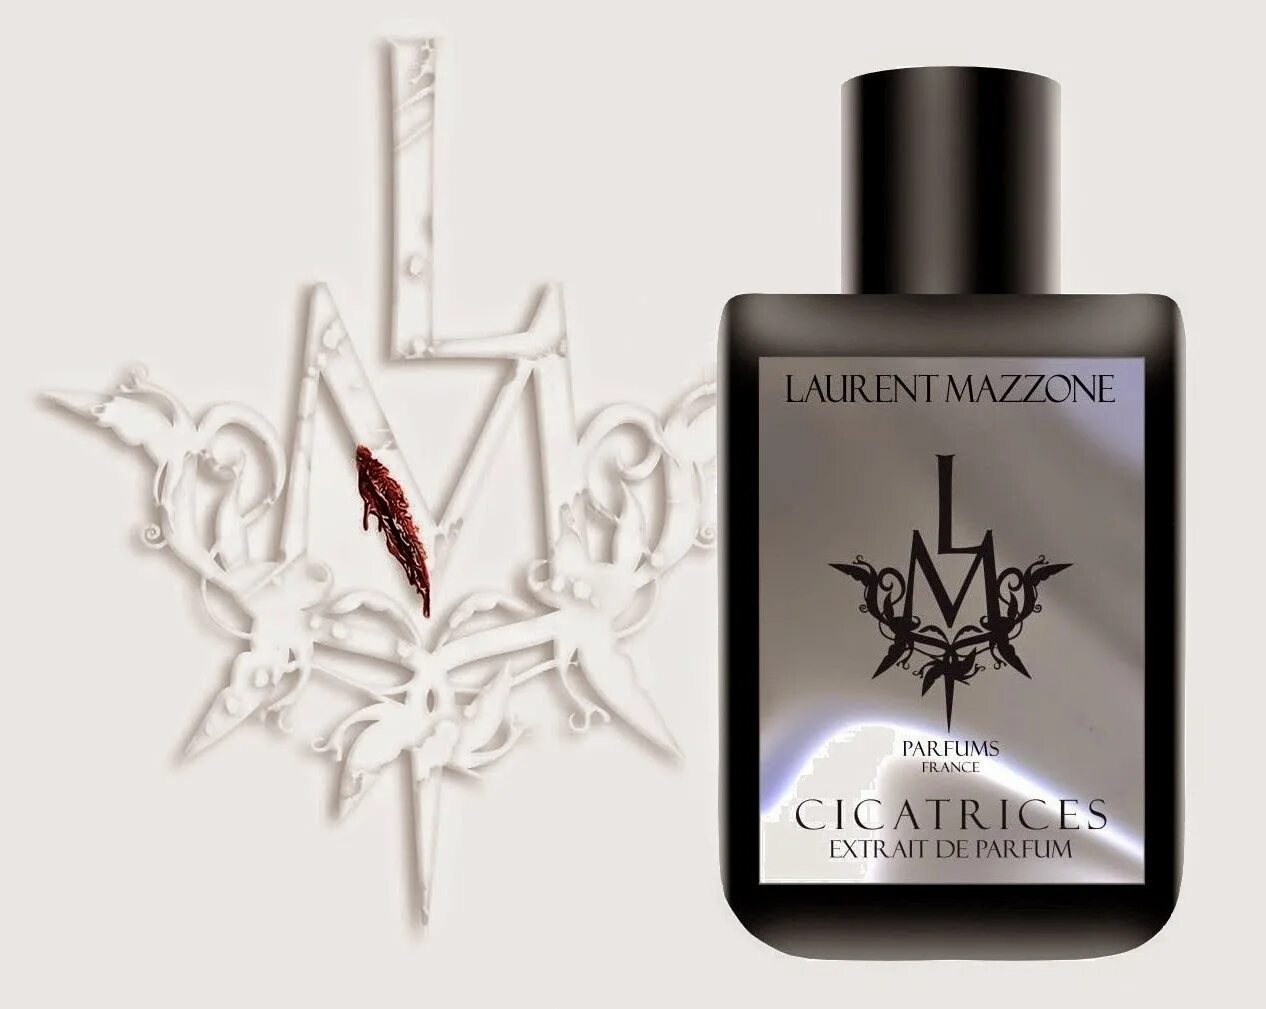 Laurent mazzone dulce pear. LM cicatrices Парфюм. LM Parfums (Laurent Mazzone Parfums) Dulce Pear. Laurent Mazzone духи. Sensual Orchid Laurent Mazzone Parfums.